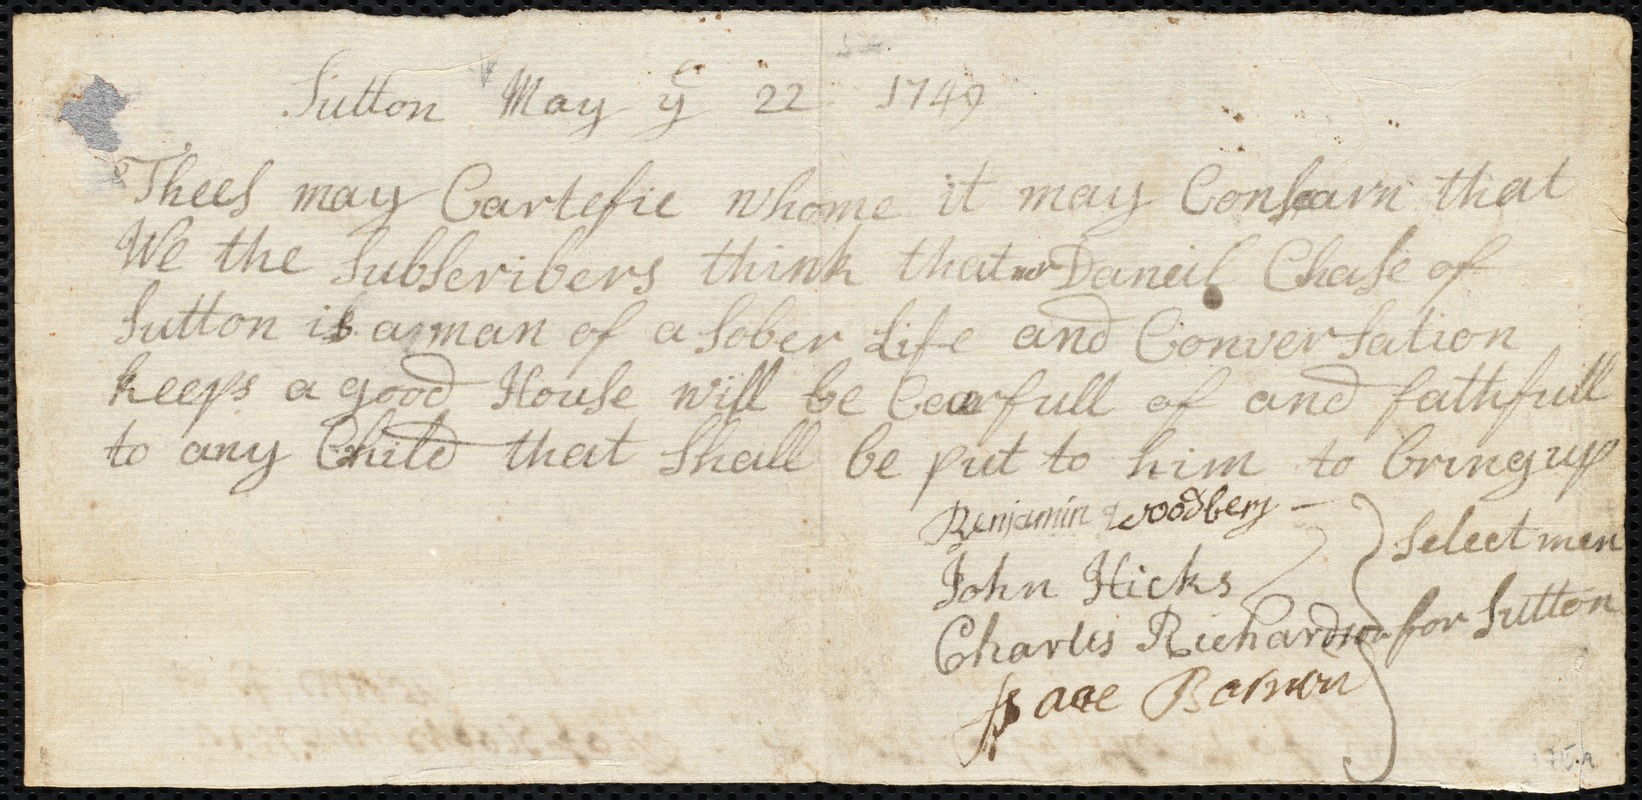 William Croxford indentured to apprentice with Daniel Chase of Sutton, 5 June 1749